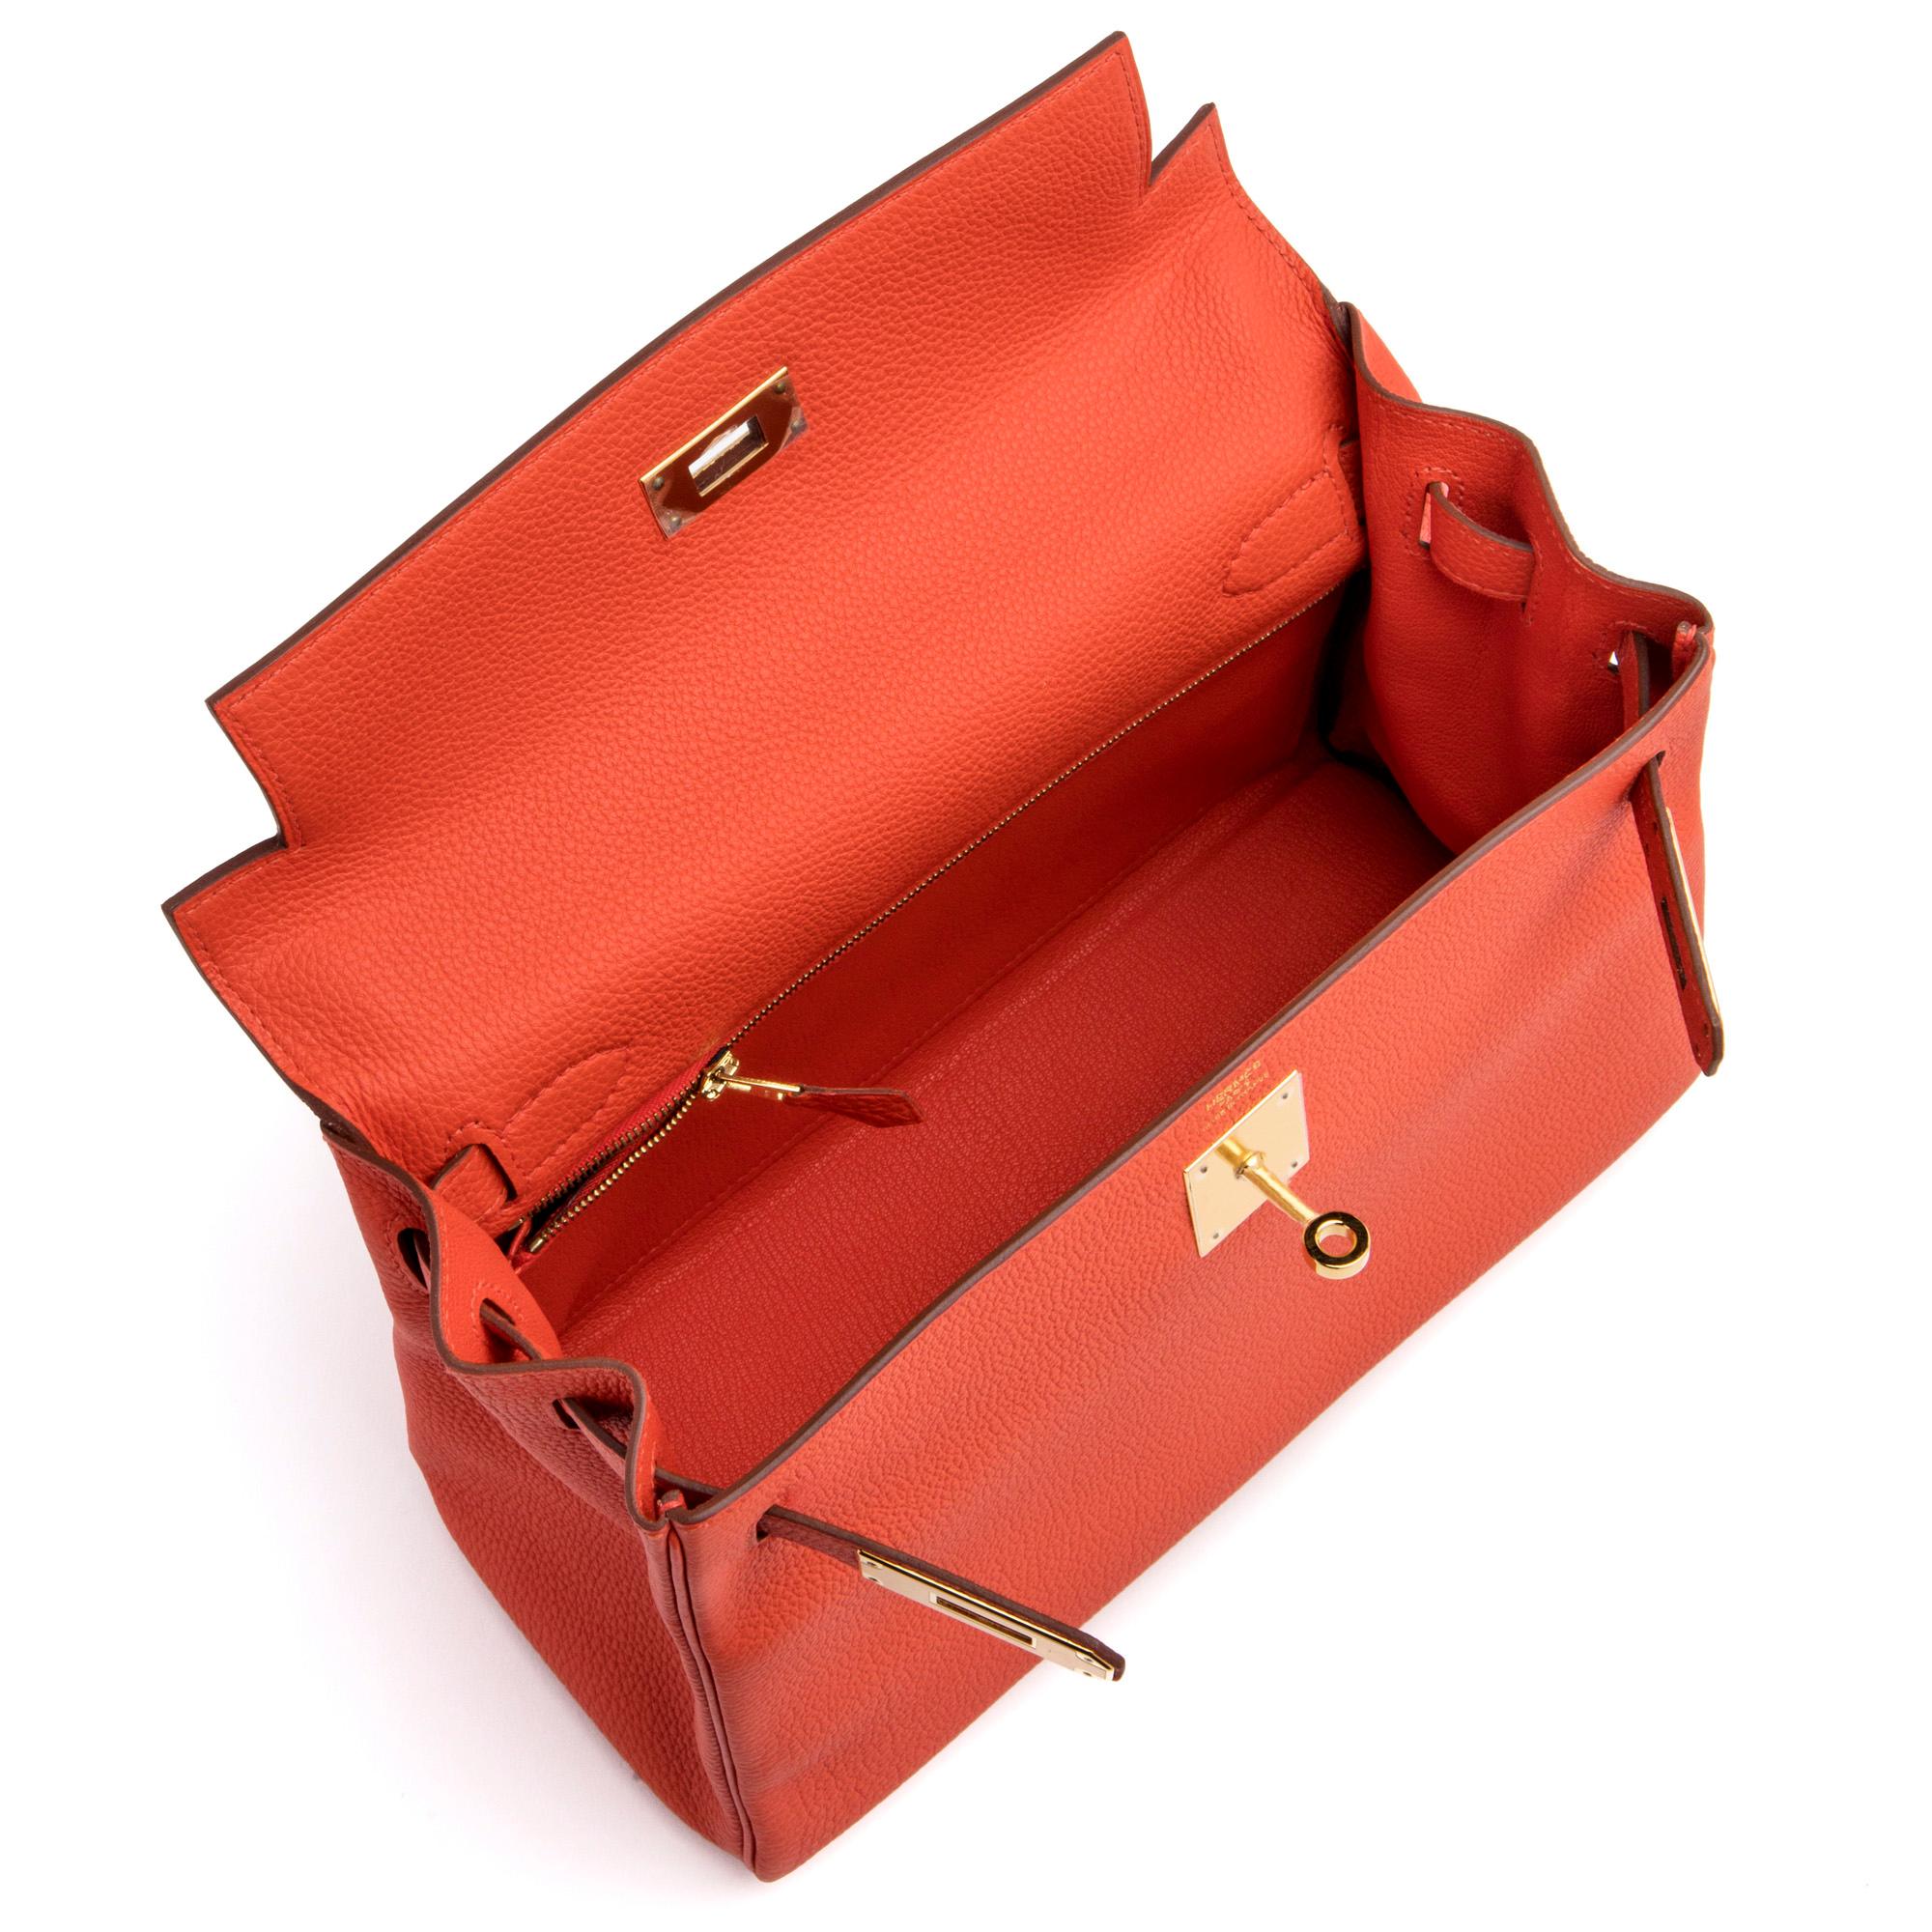 Hermés Retourne Capucine Kelly 28cm In Excellent Condition For Sale In New York, NY